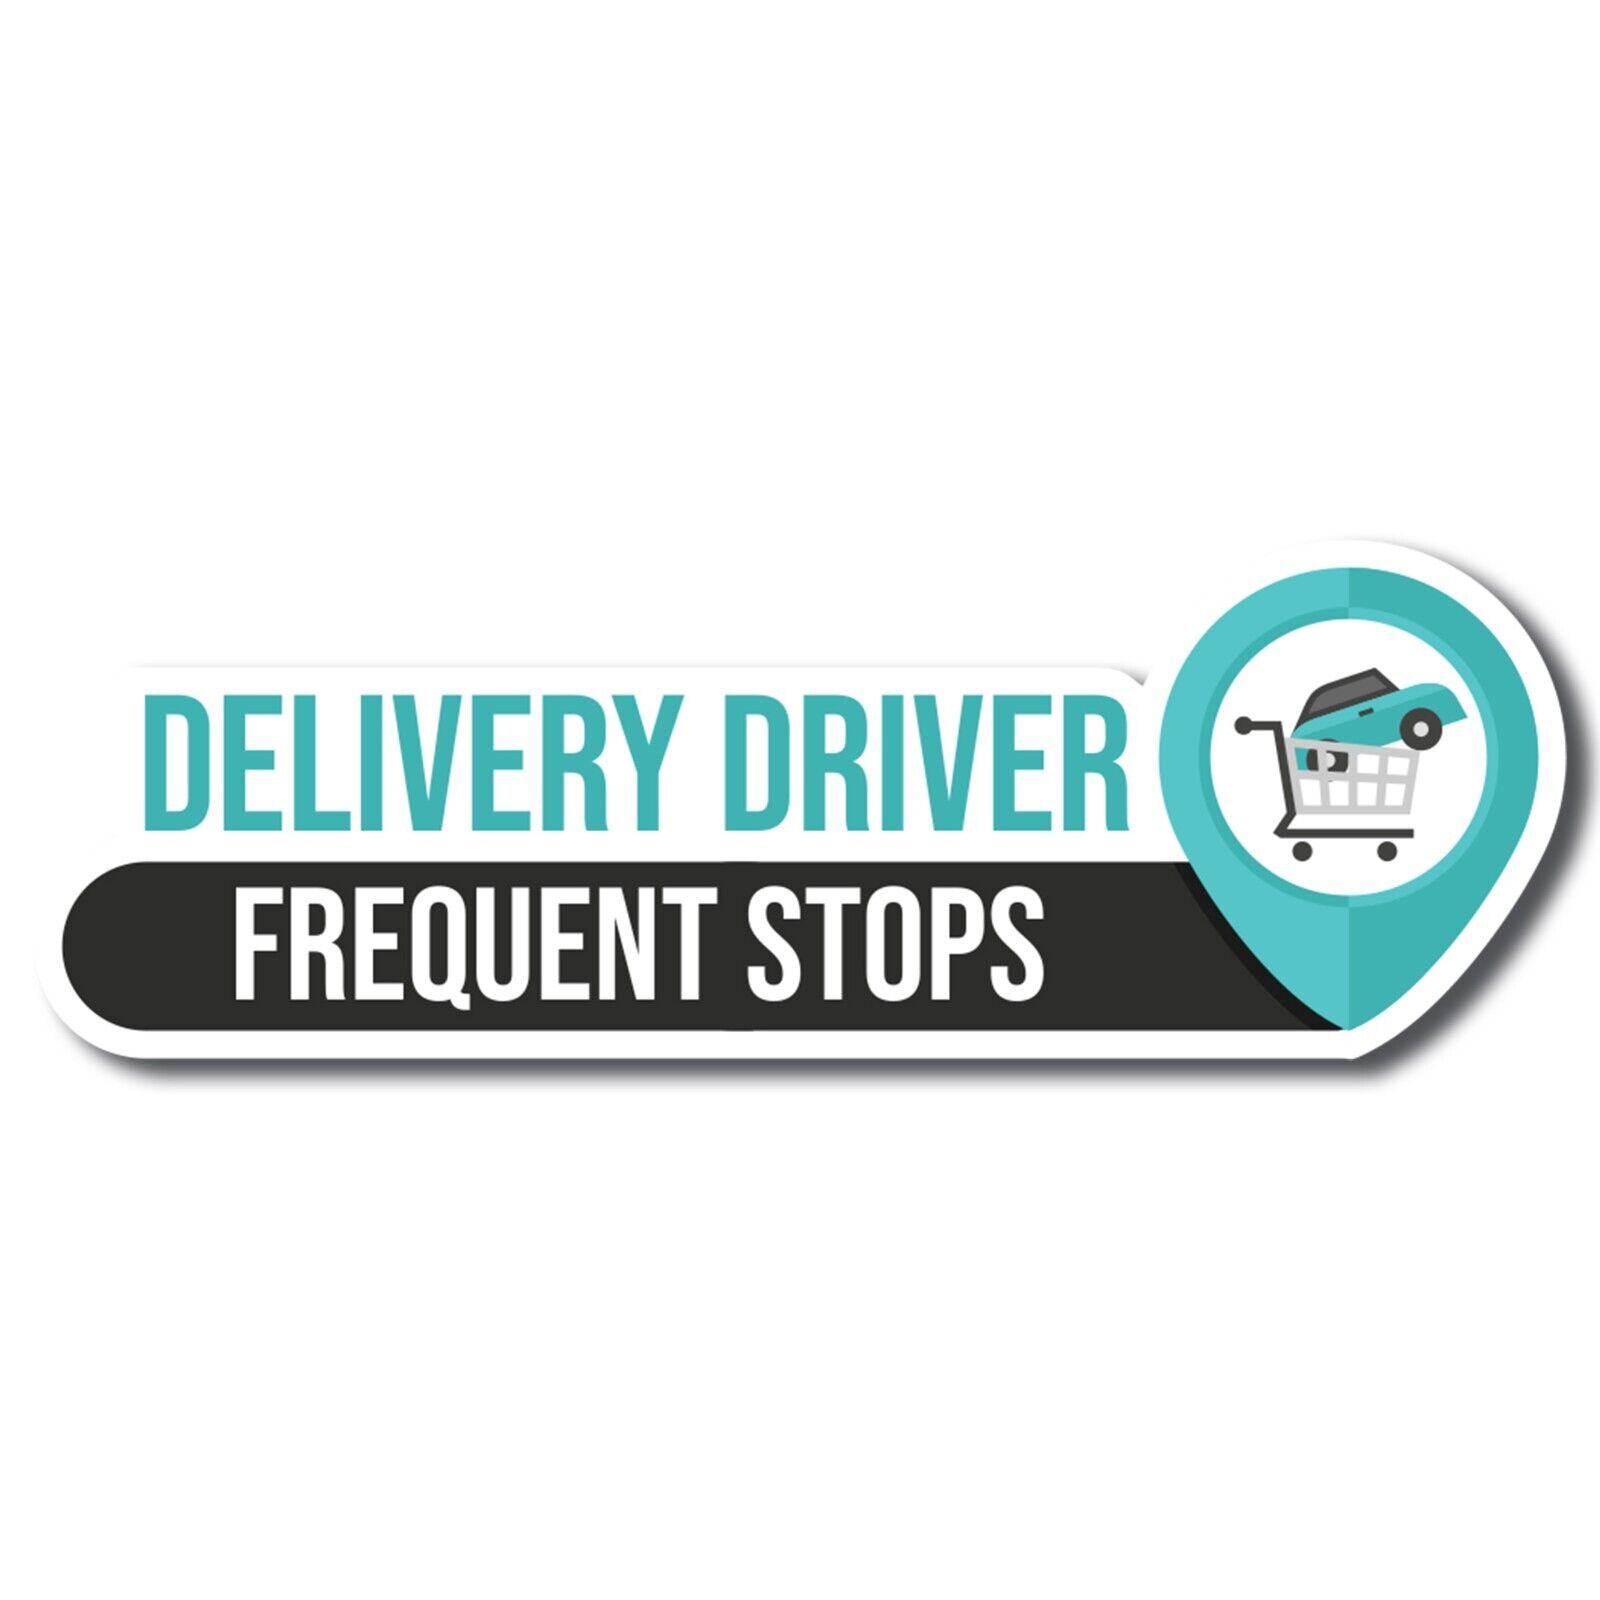 Magnet Me Up Black and Blue Frequent Stops Delivery Driver Magnet Decal, 8x3 in